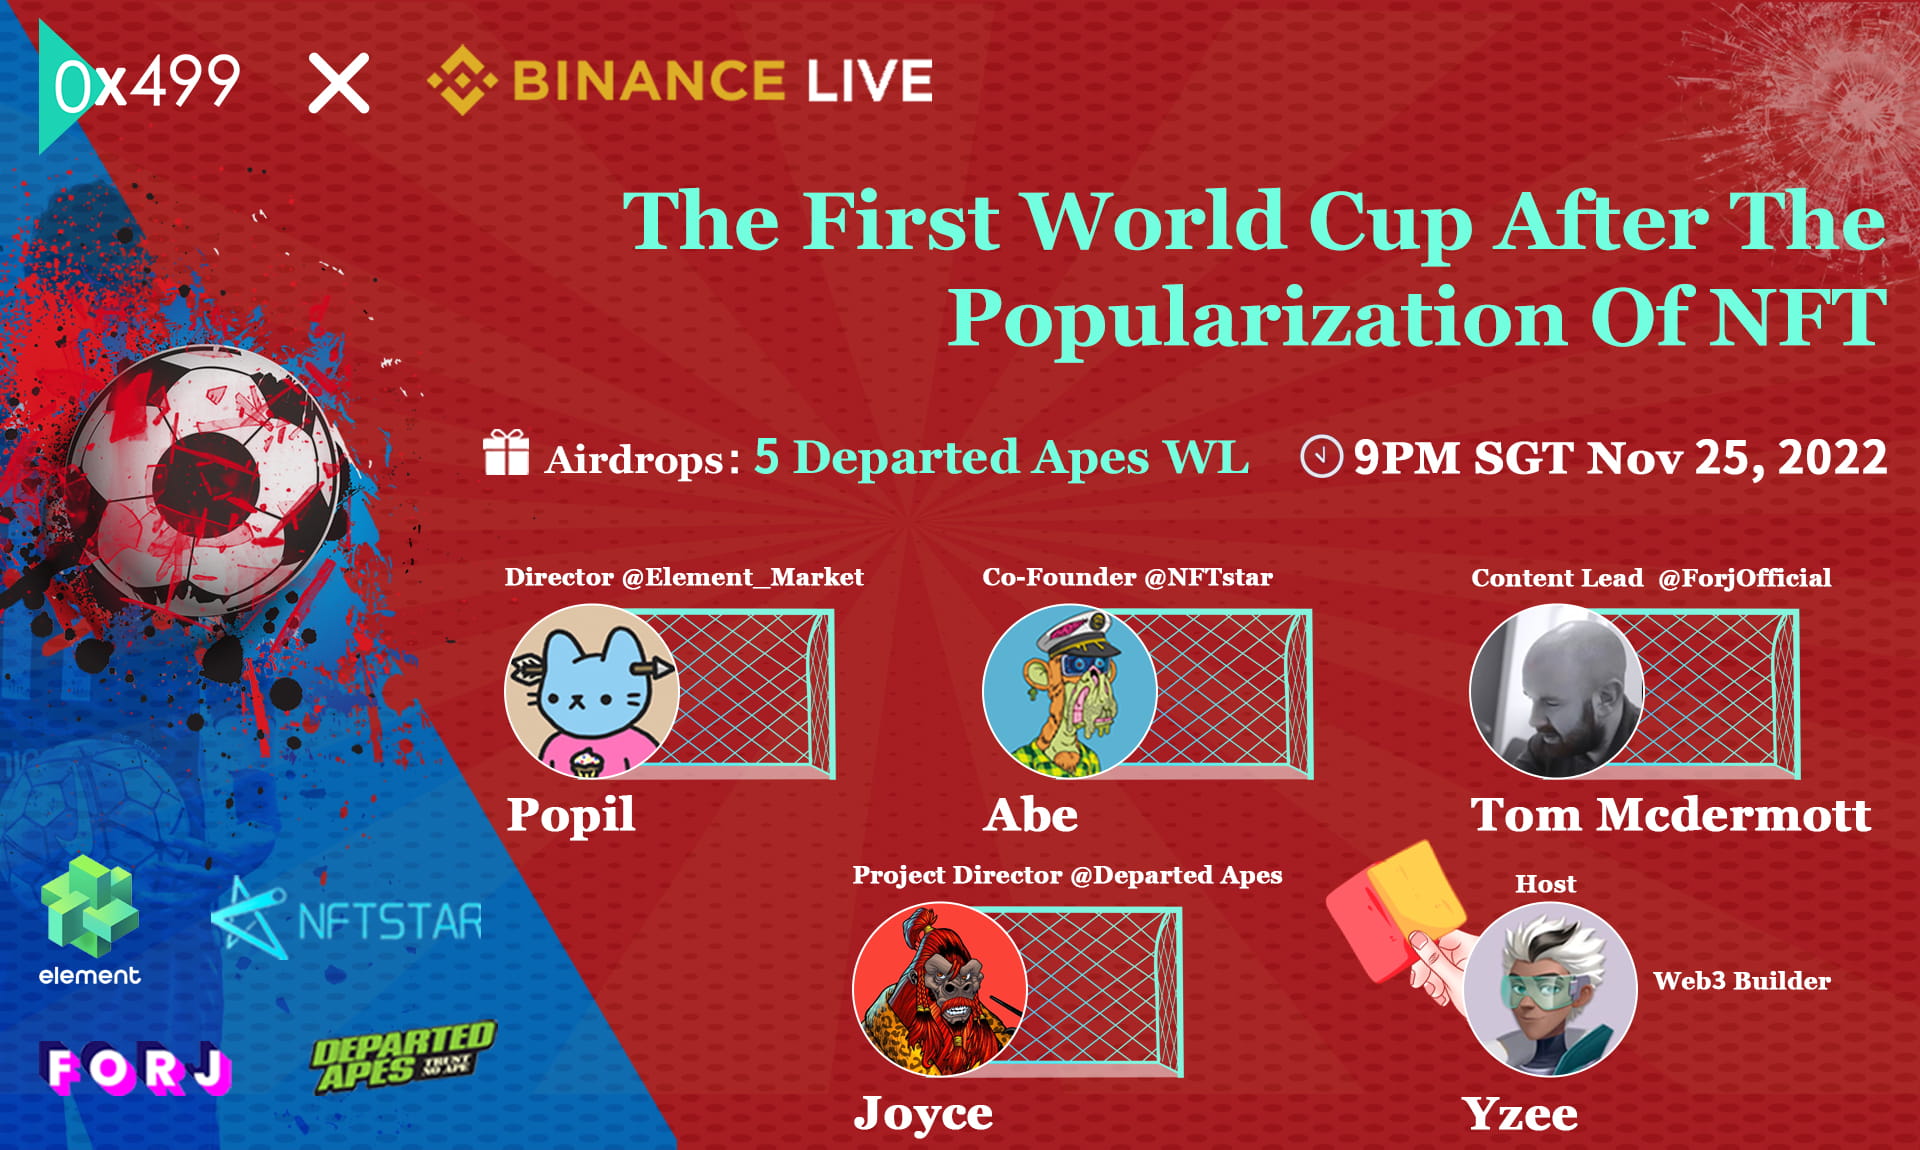 0x499: The First World Cup After The Popularization of NFT